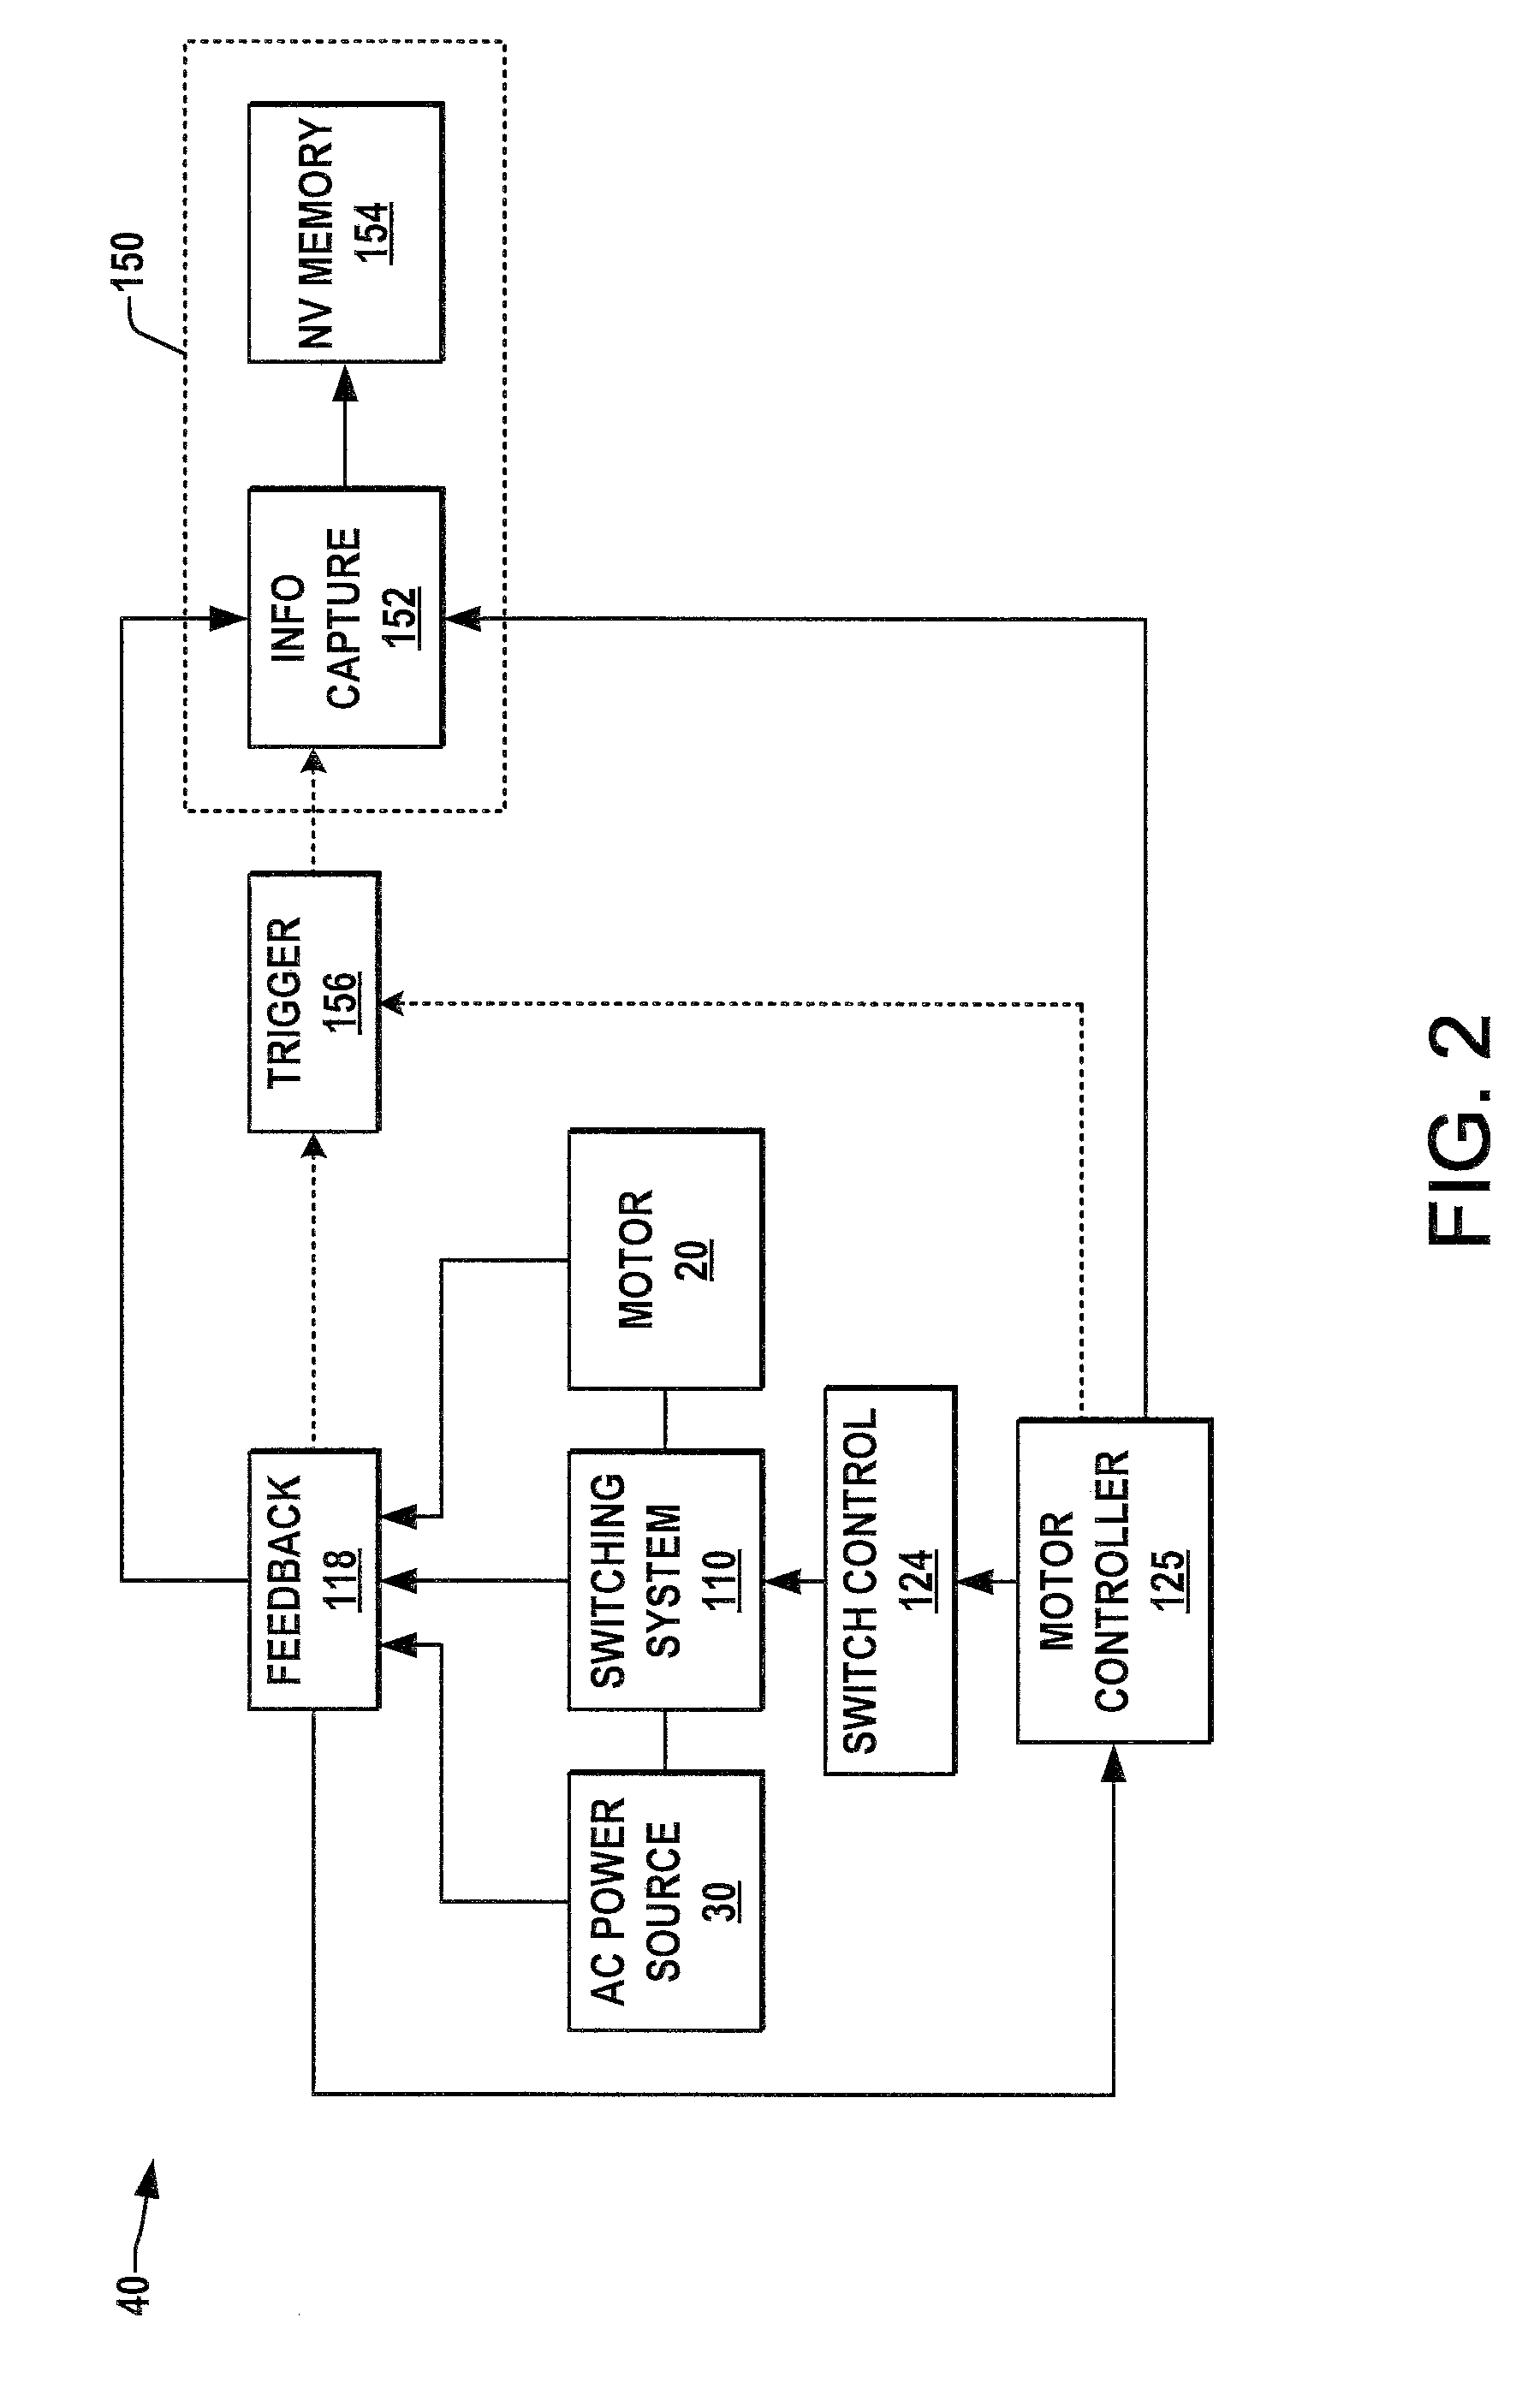 Methods and system for motor drive information capture